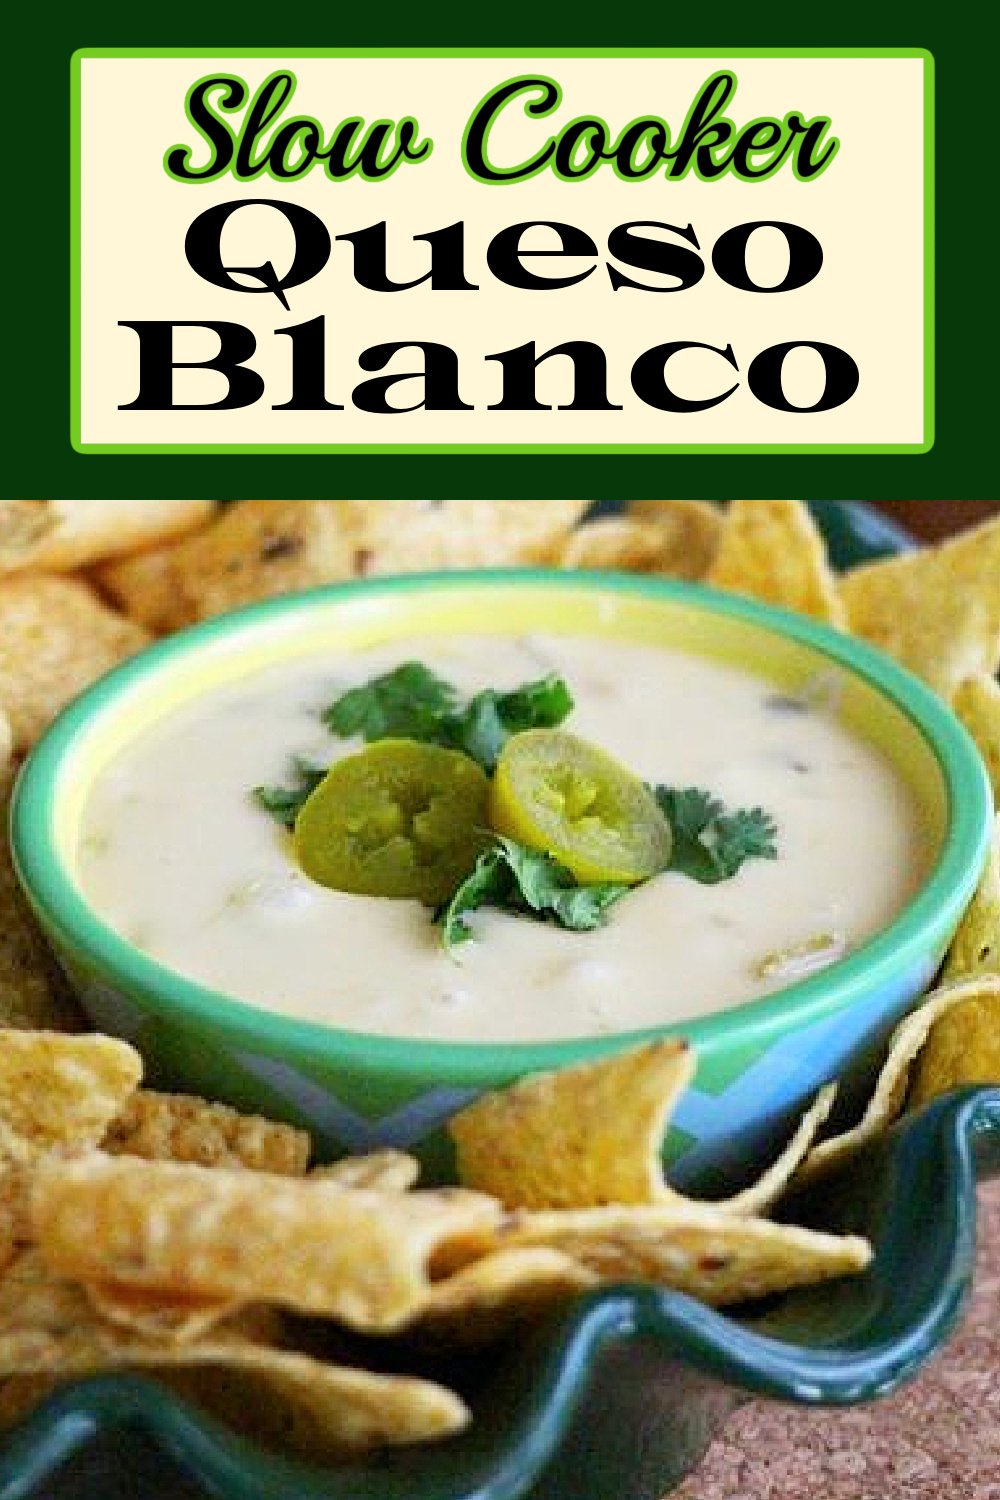 This creamy Slow Cooker Queso Blanco Dip is just like the addictive dip served at Mexican restaurants made in a slow cooker at home #quesoblancodip #slowcookerdip #diprecipes #mexicandip #quesorecipes #crockpotquesodip #crockpotrecipes #slowcookedquesodip via @melissasssk